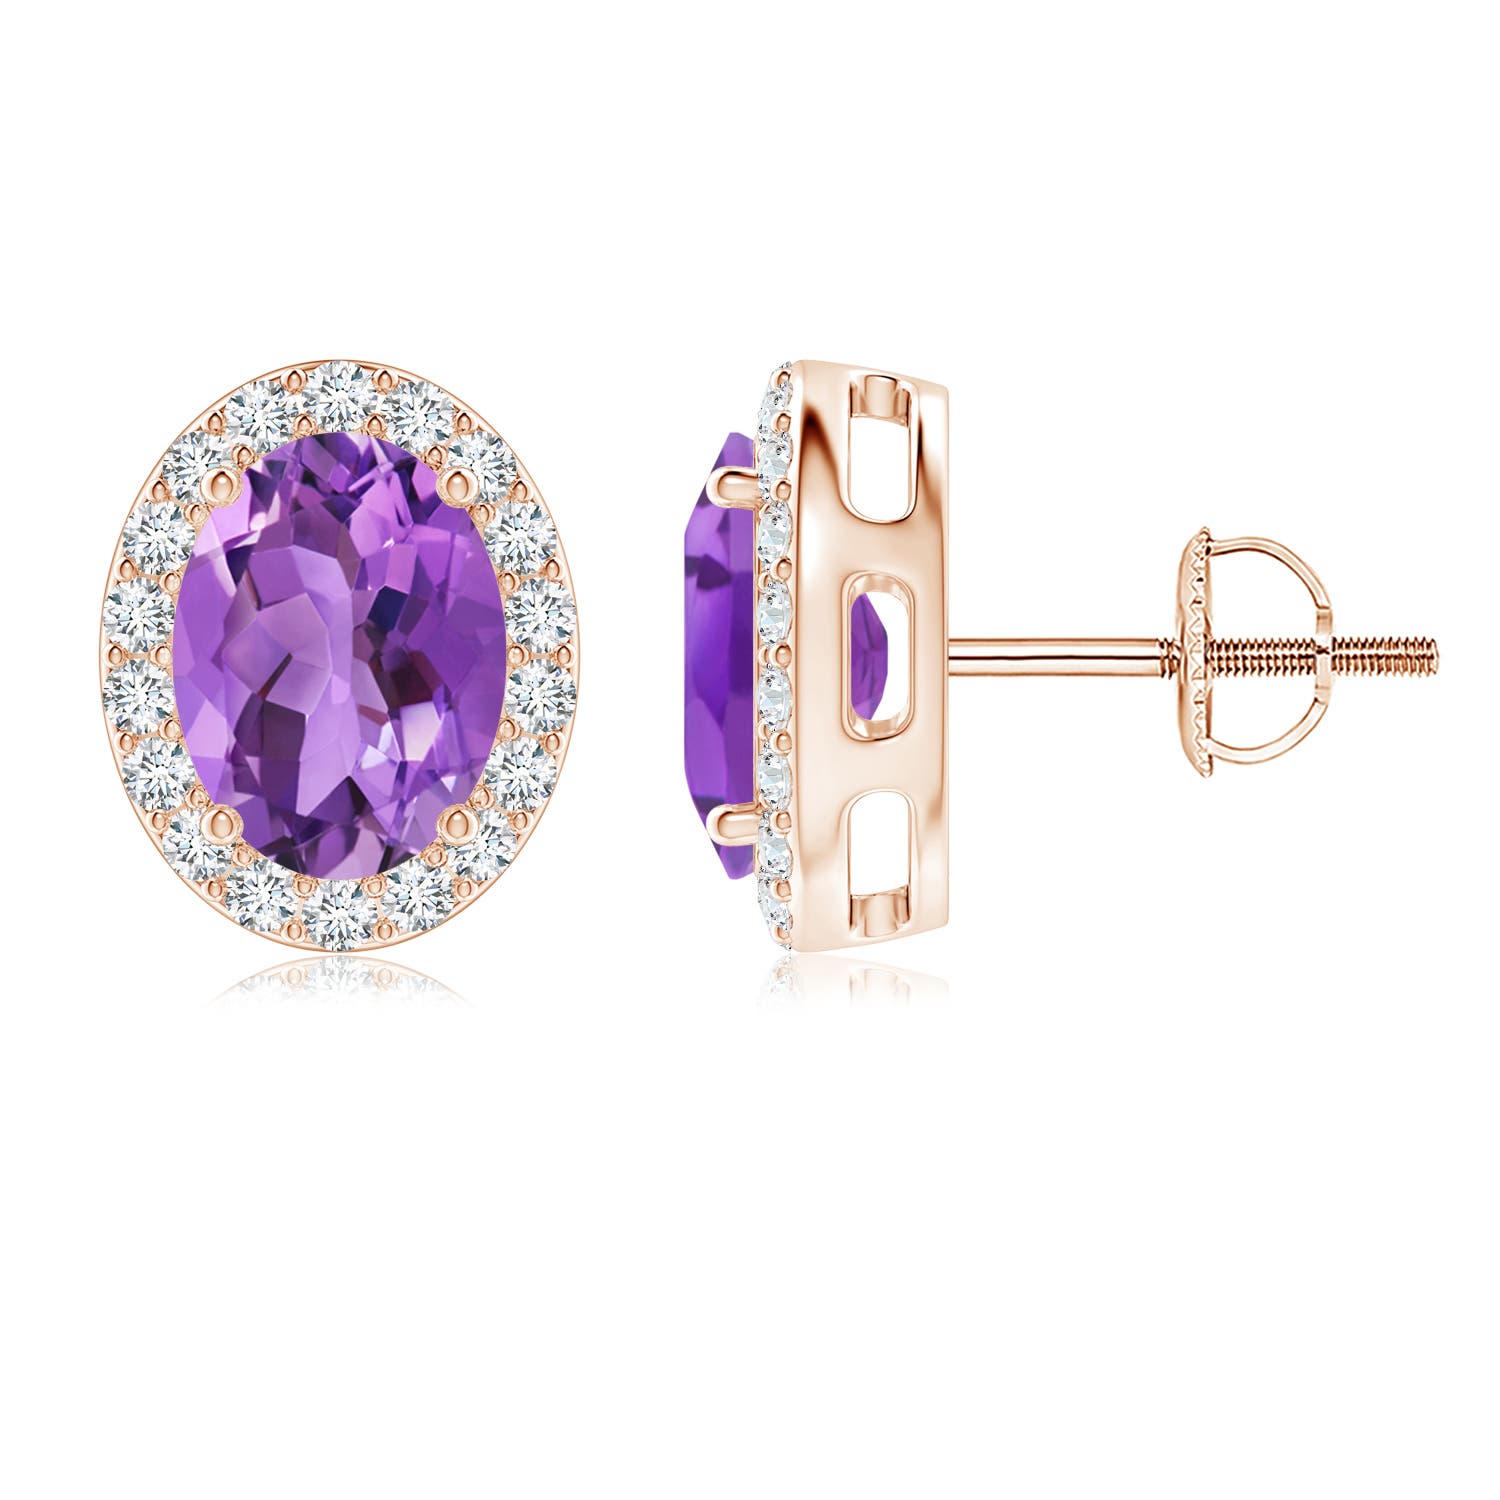 AA - Amethyst / 2.66 CT / 14 KT Rose Gold